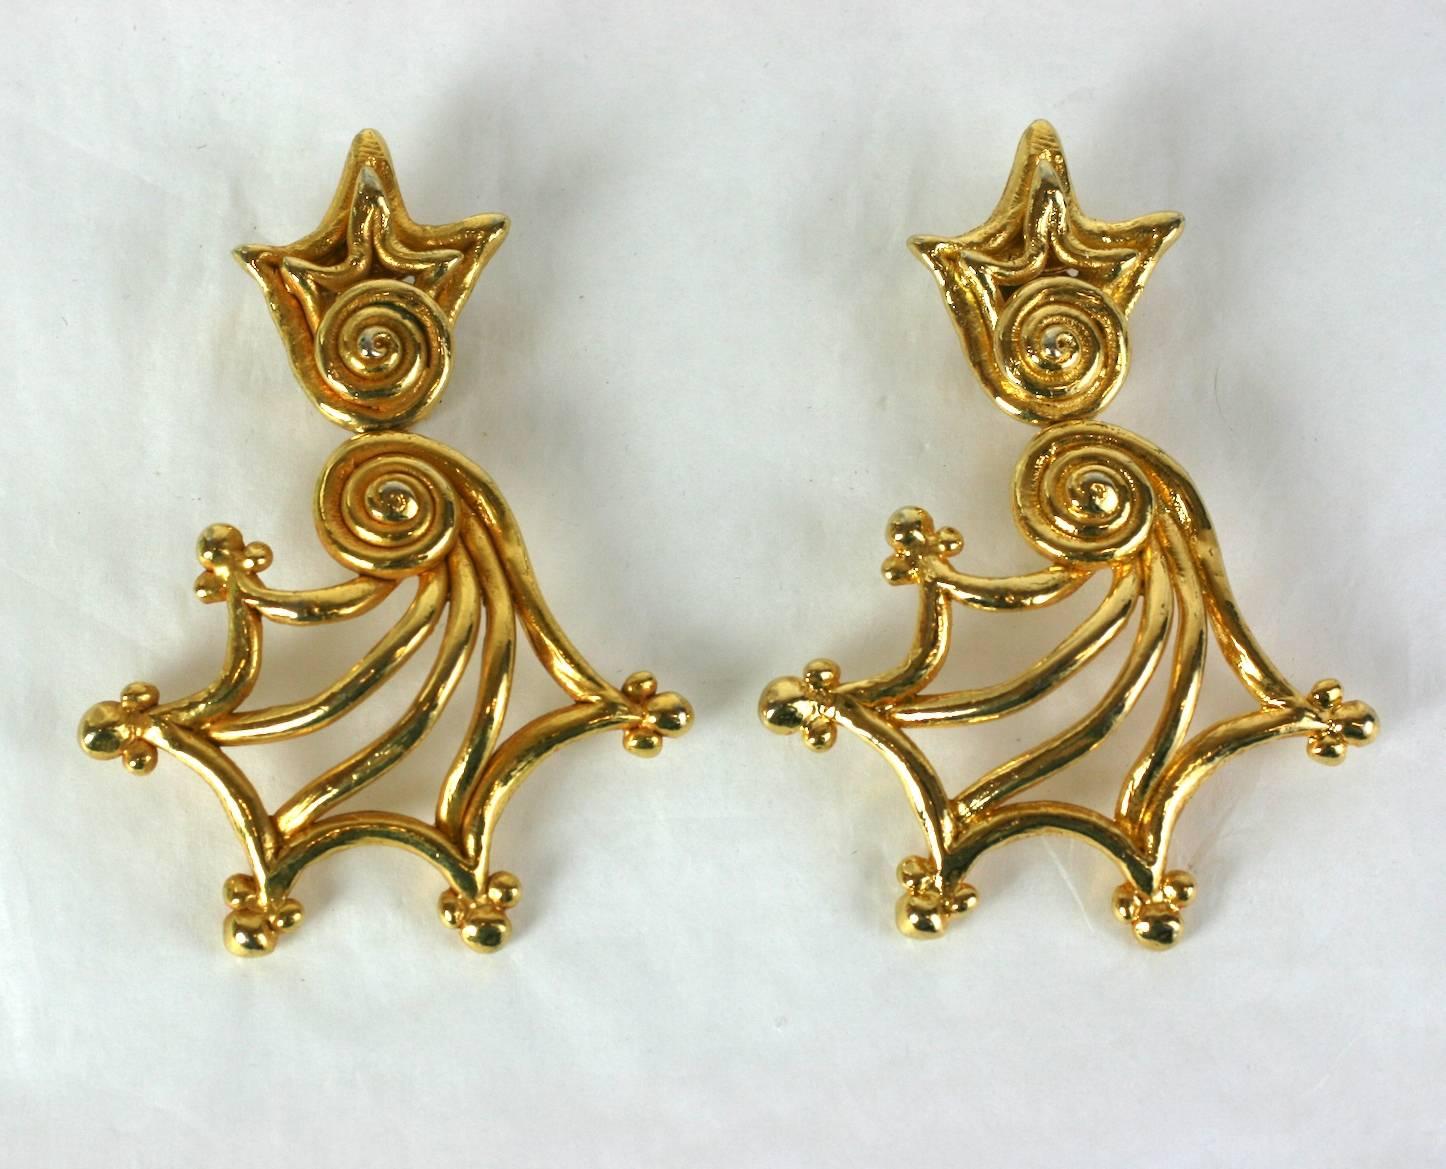 Sonia Rykiel golden swirled fan shaped earrings from the 1990's. Striking, fun large scale. Clip back fittings. France 1990's.
Excellent condition. 